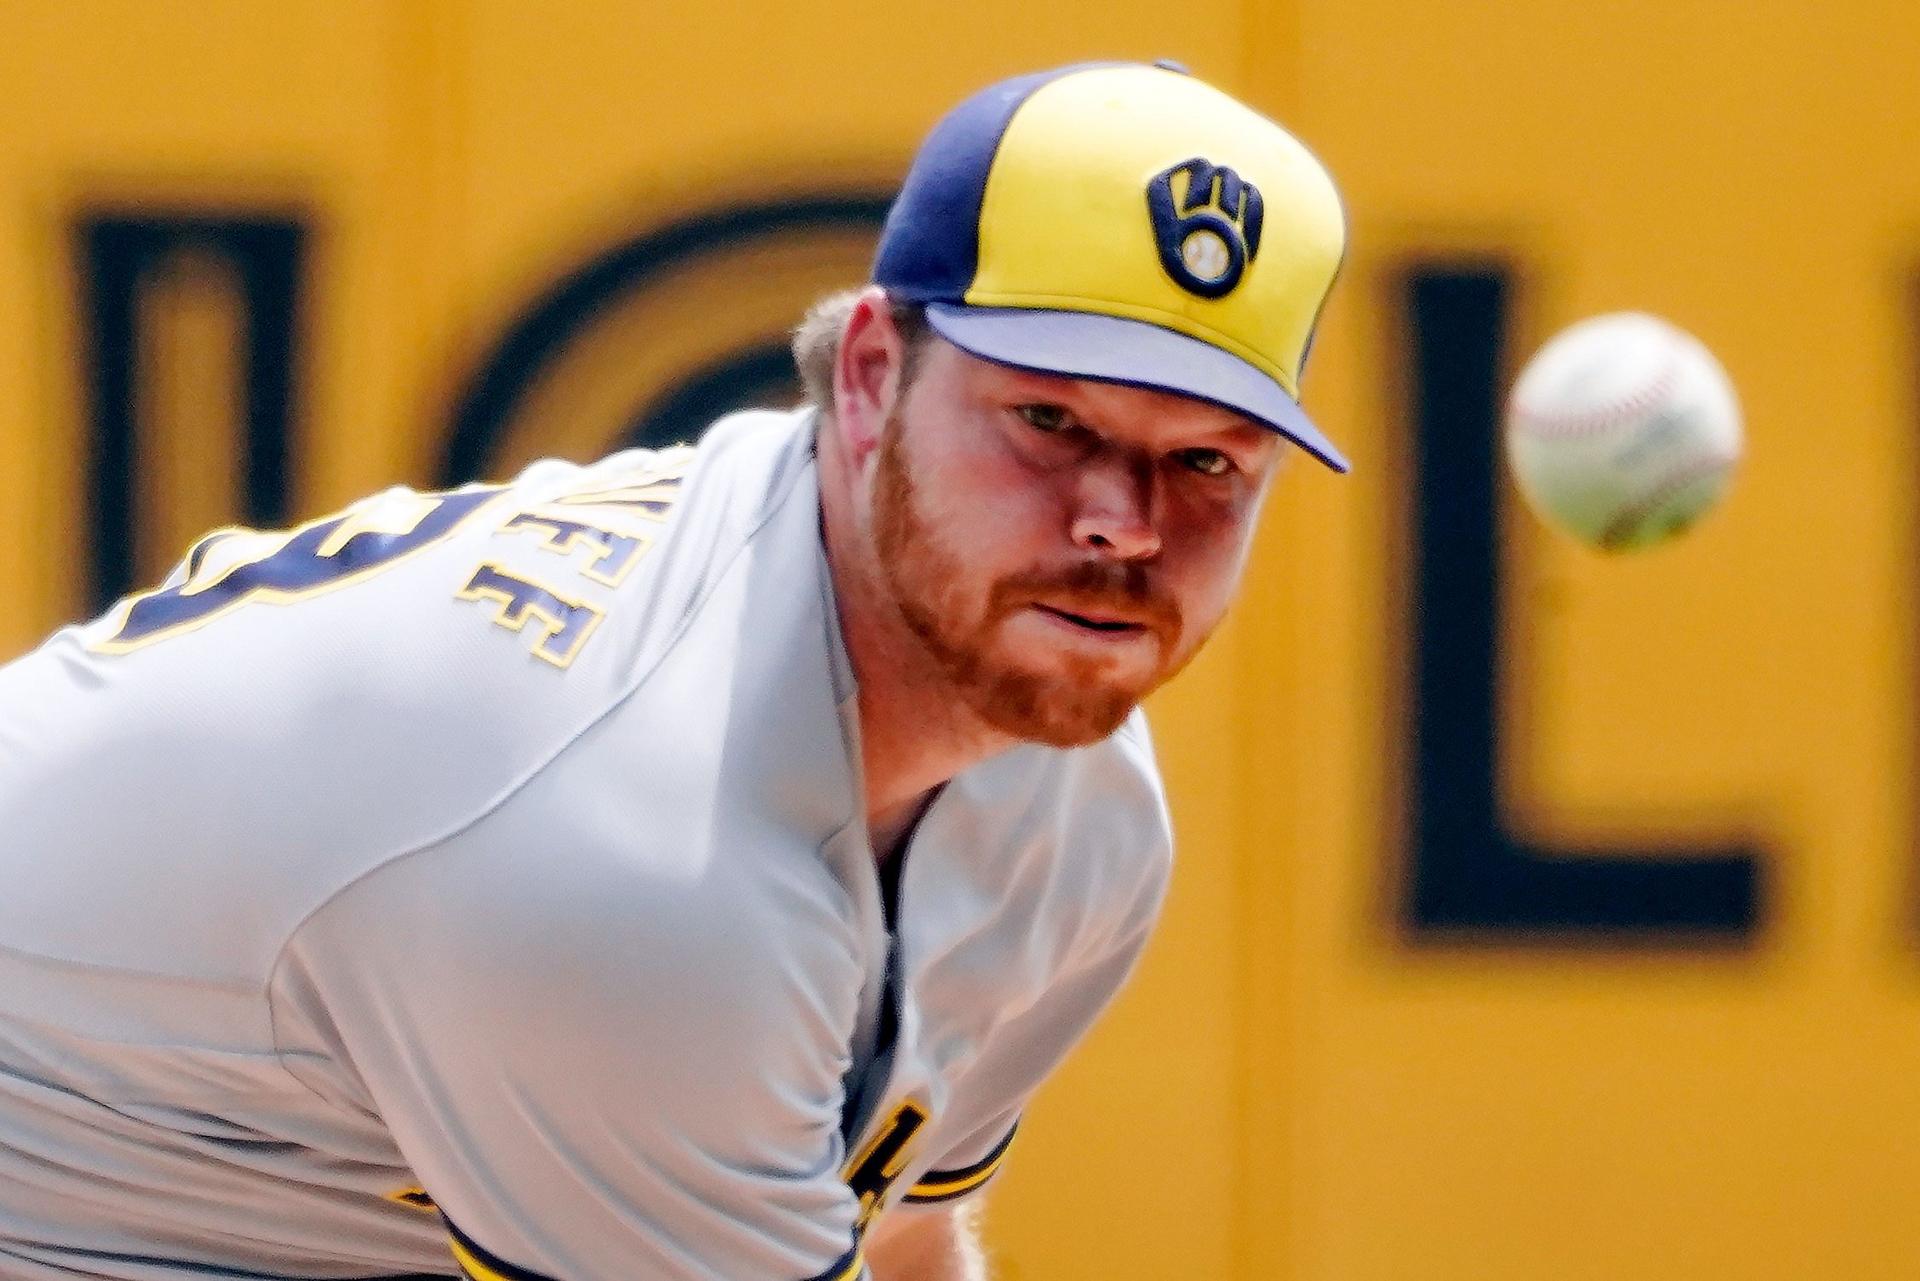 Rays vs. Brewers Best MLB Bets, Picks & Predictions – August 10, 2022: Two Stud Pitchers Battle It Out